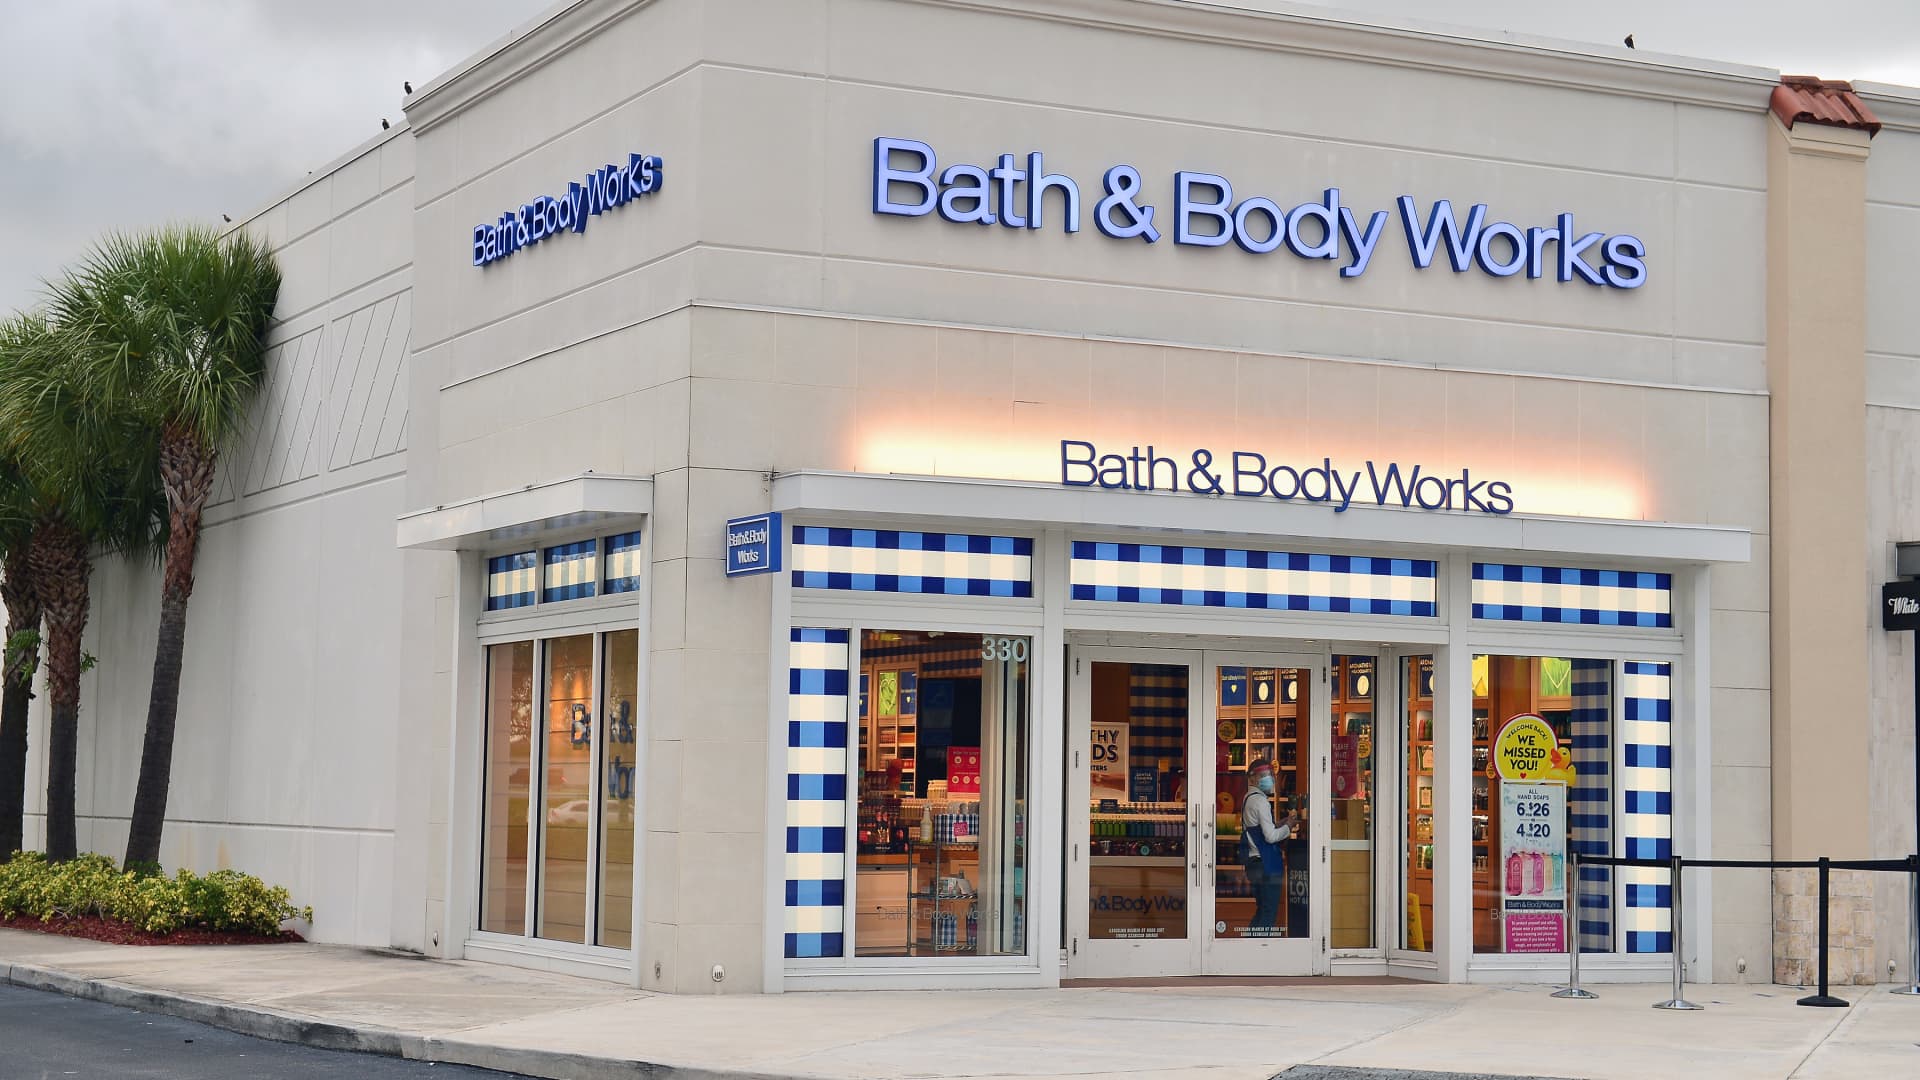 Bath and Body Works can more than double after falling 60%, Piper Sandler says